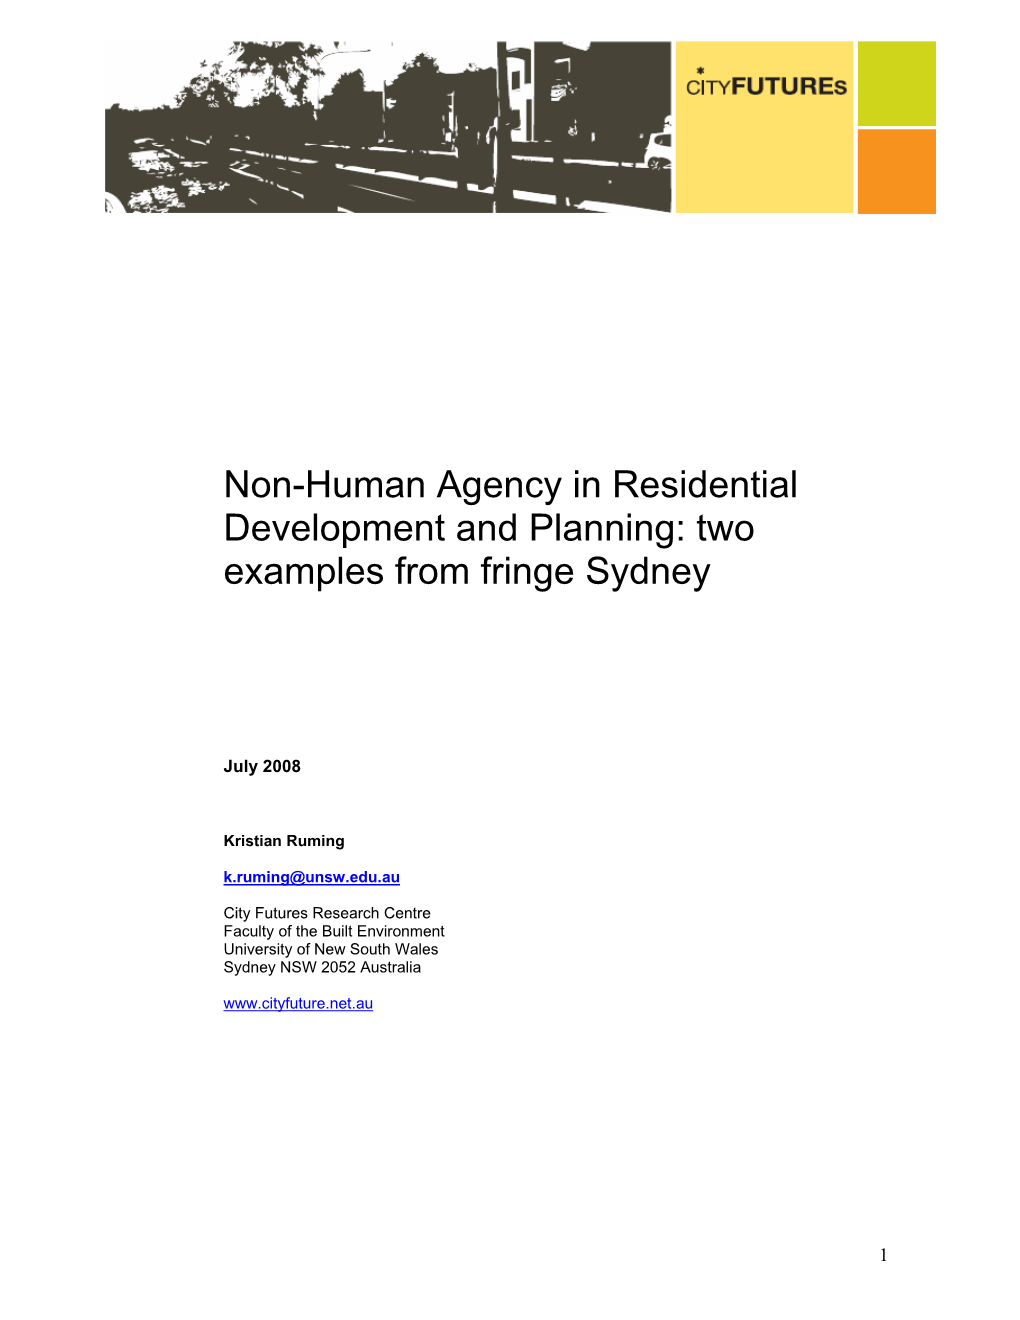 Non-Human Agency in Residential Development and Planning: Two Examples from Fringe Sydney